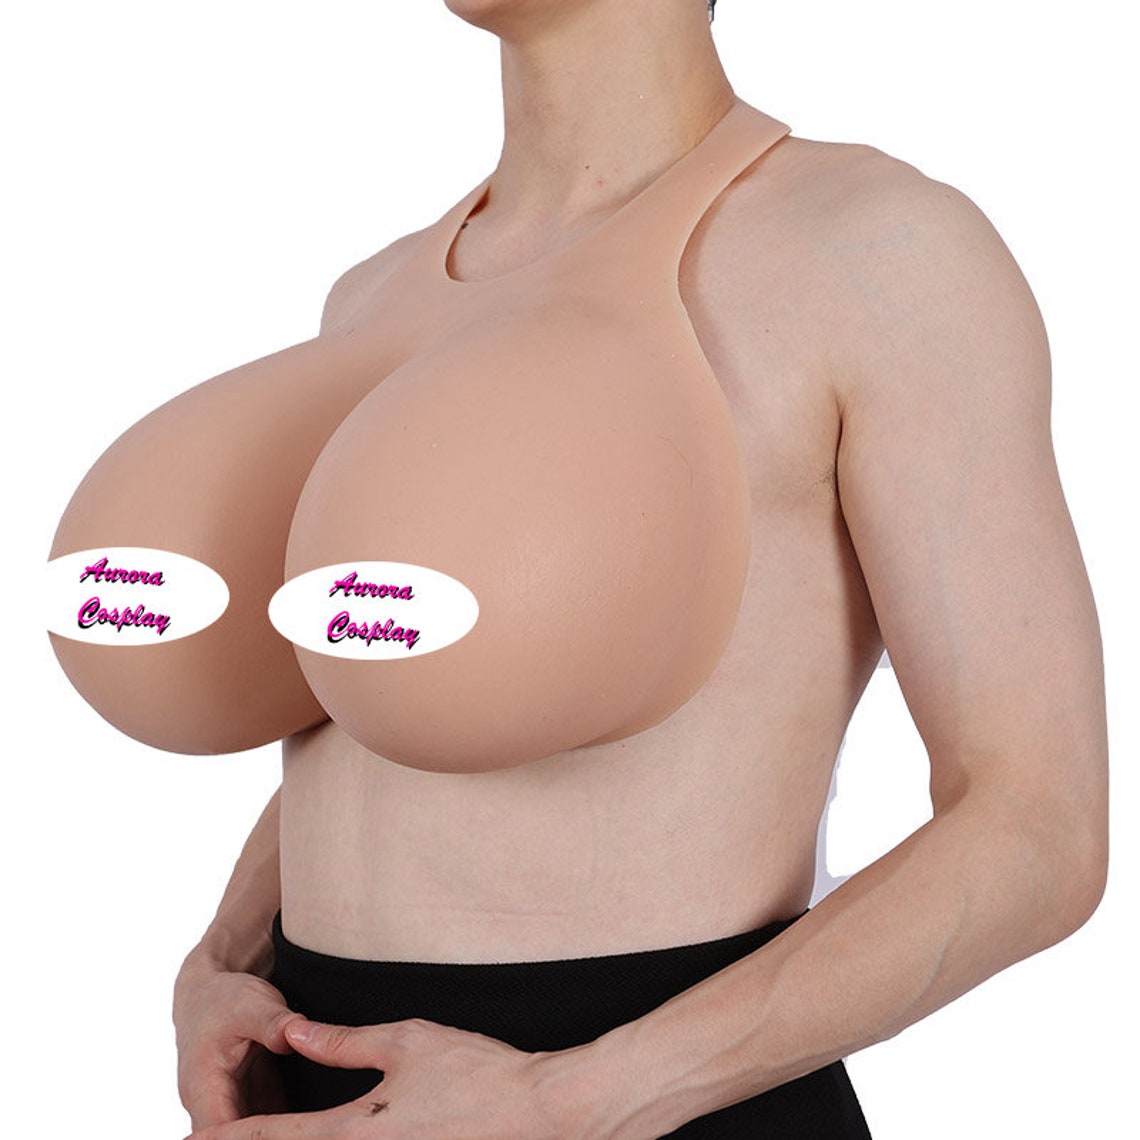 D-Cup Silicone Breasts - Ideal Prosthetic for Various Needs